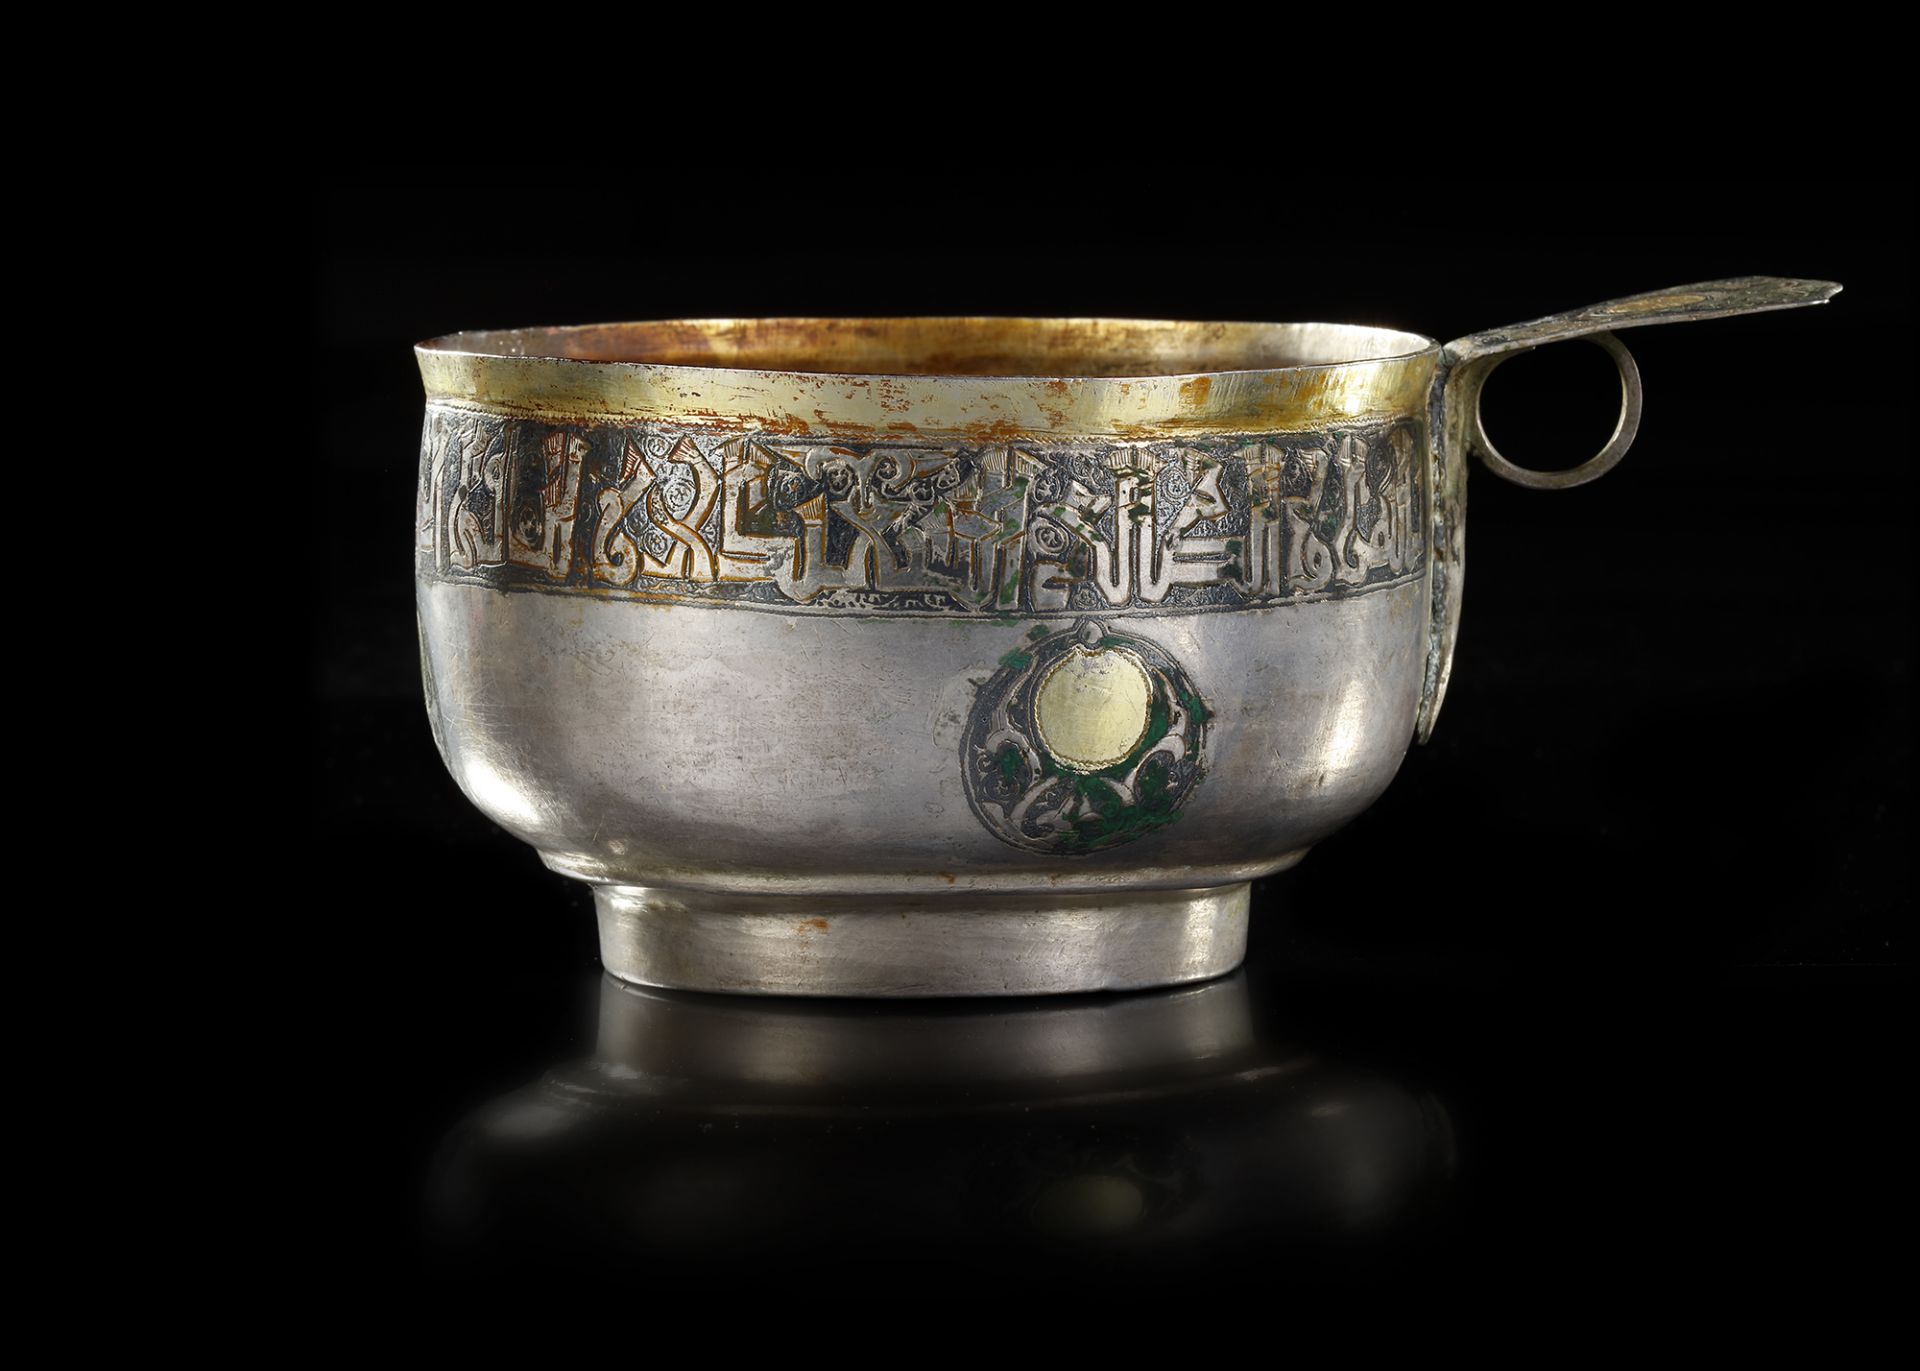 A RARE SILVER AND NIELLOED CUP WITH KUFIC INSCRIPTION, PERSIA OR CENTRAL ASIA, 11TH-12TH CENTURY - Image 10 of 34